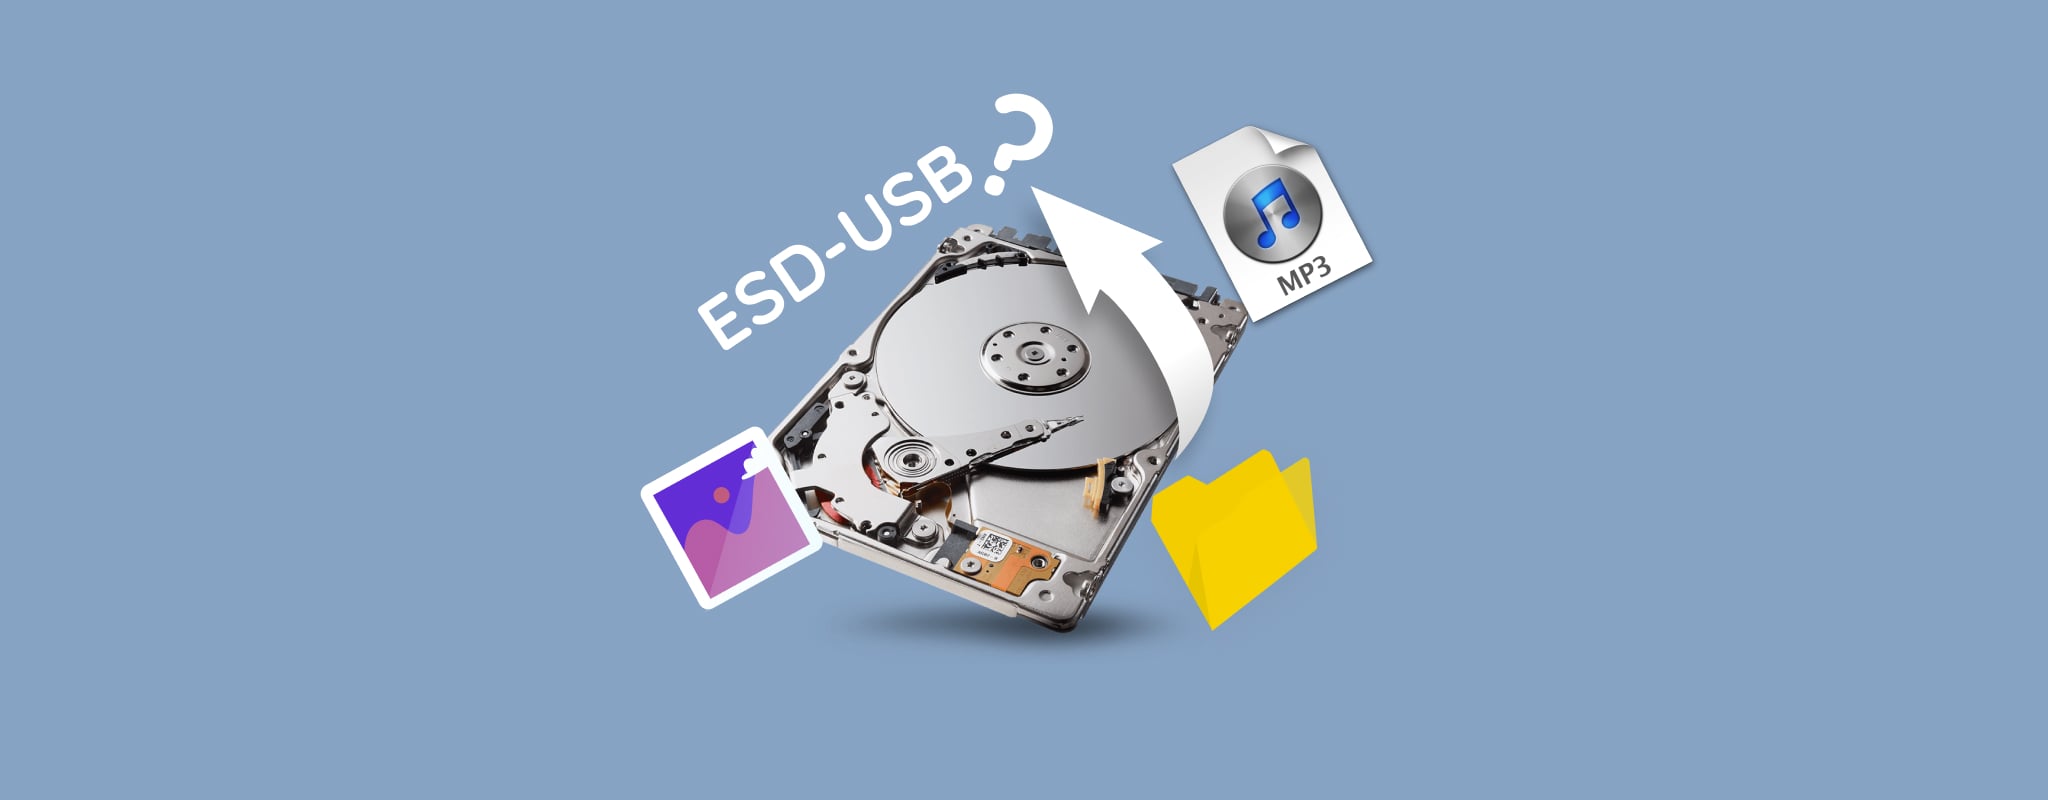 hard drive turned into esd